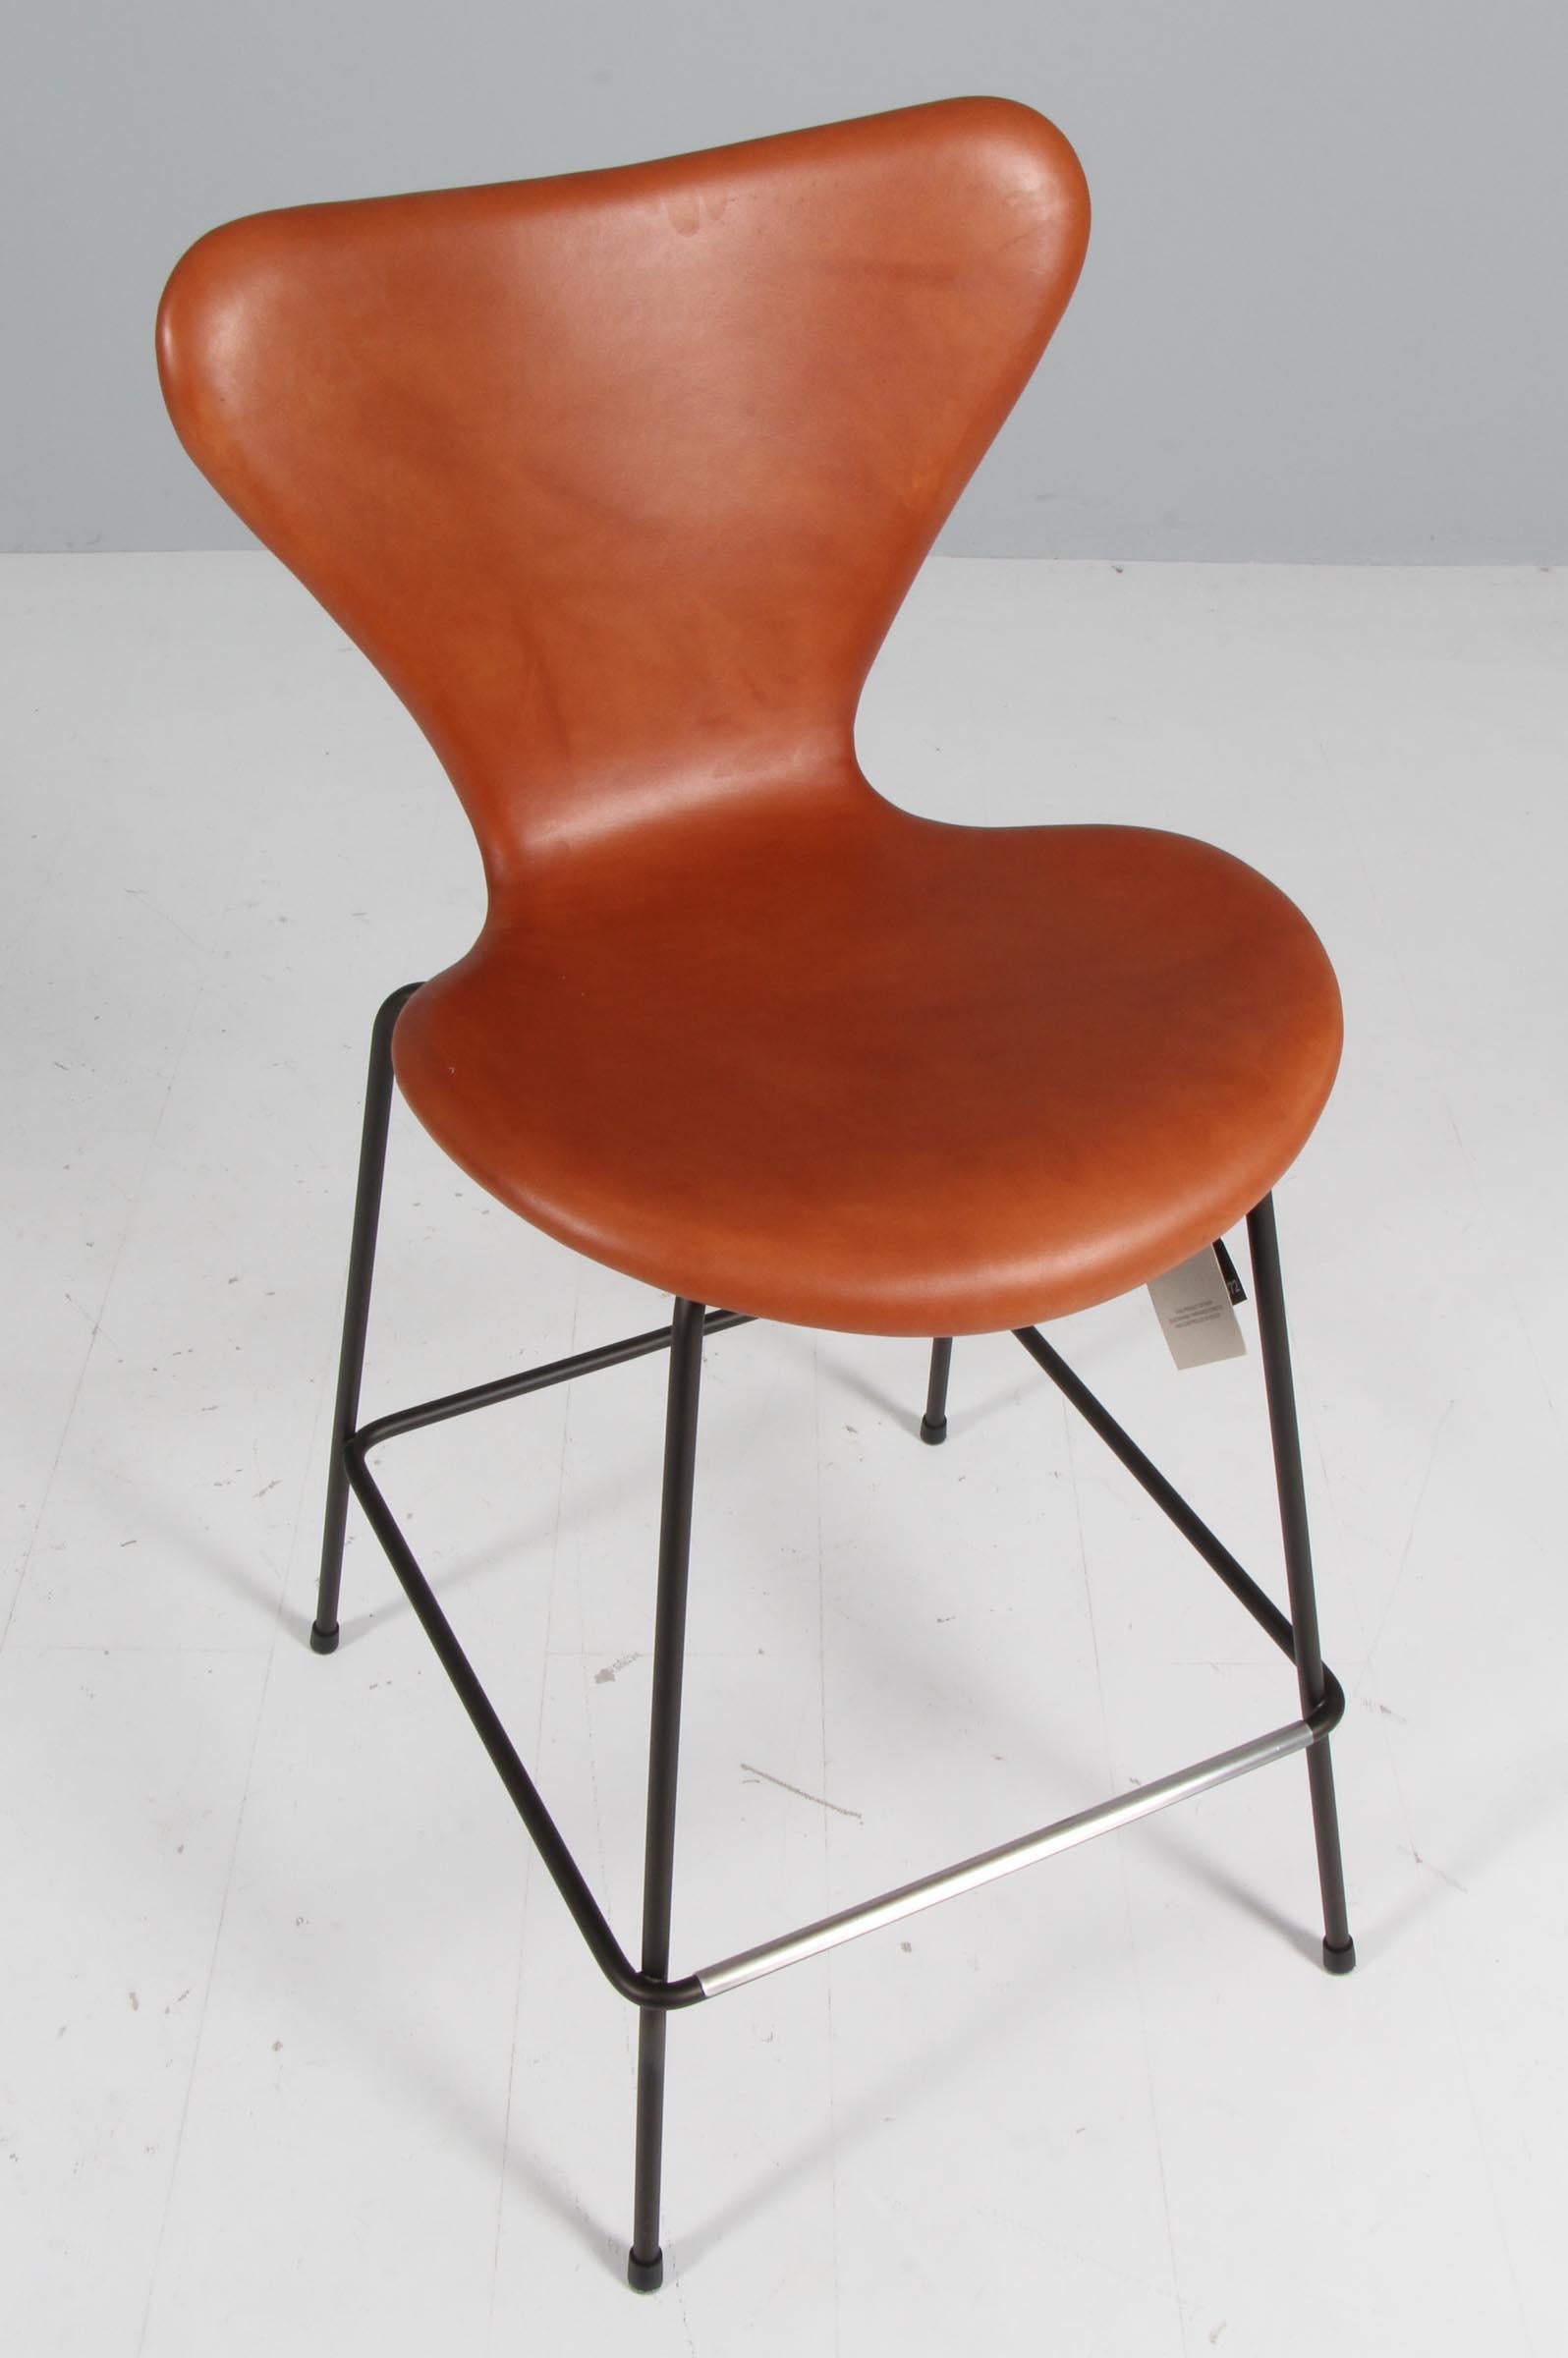 Arne Jacobsen bar chair with shell of cognac aniline leather

Base of dark brown powder coated steel.

Model 3187 Syveren, made by Fritz Hansen.